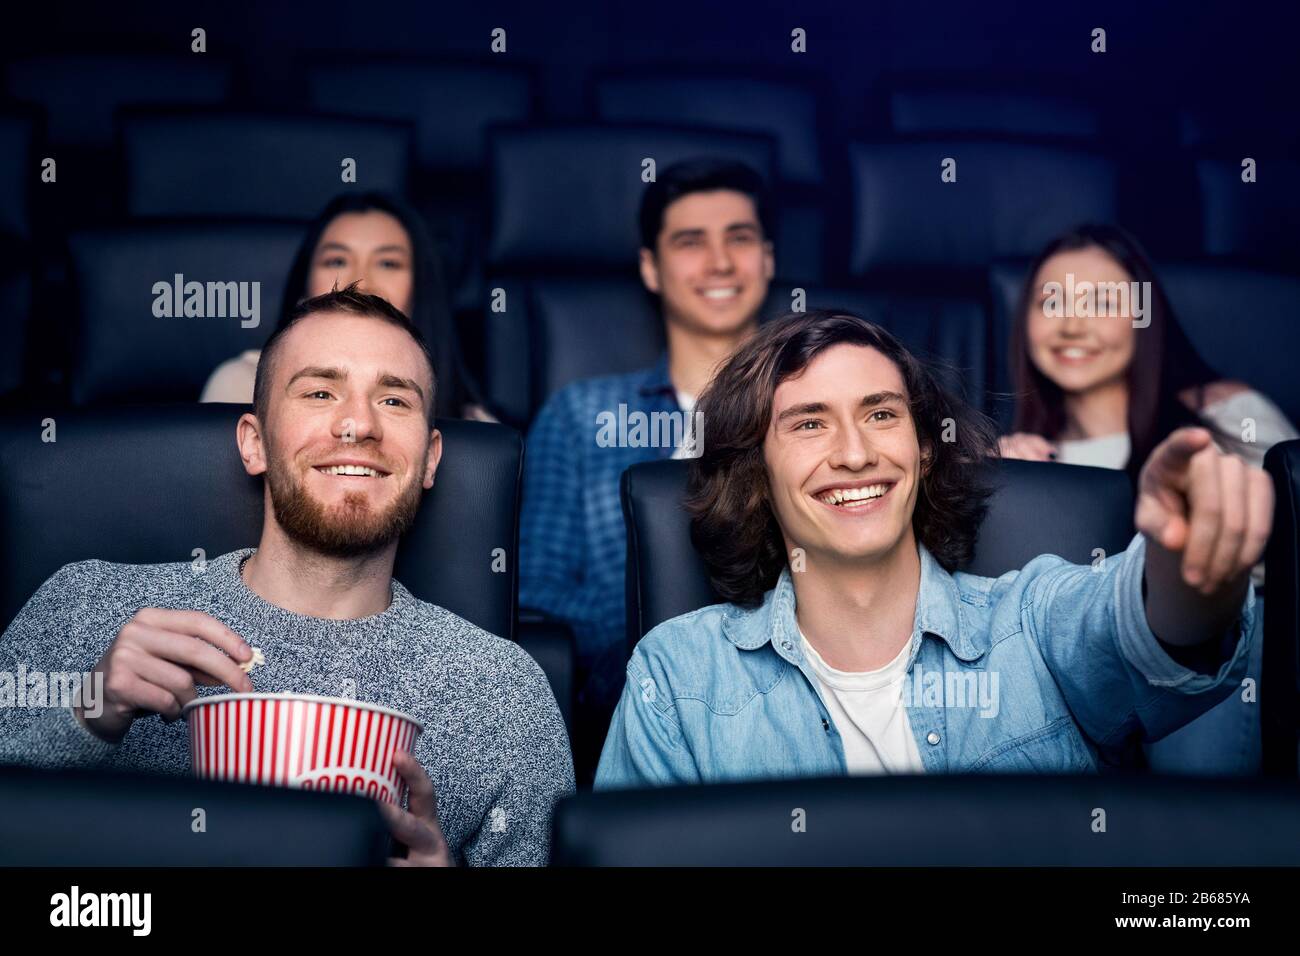 Weekend activity. Young friends on movie night in cinema Stock Photo